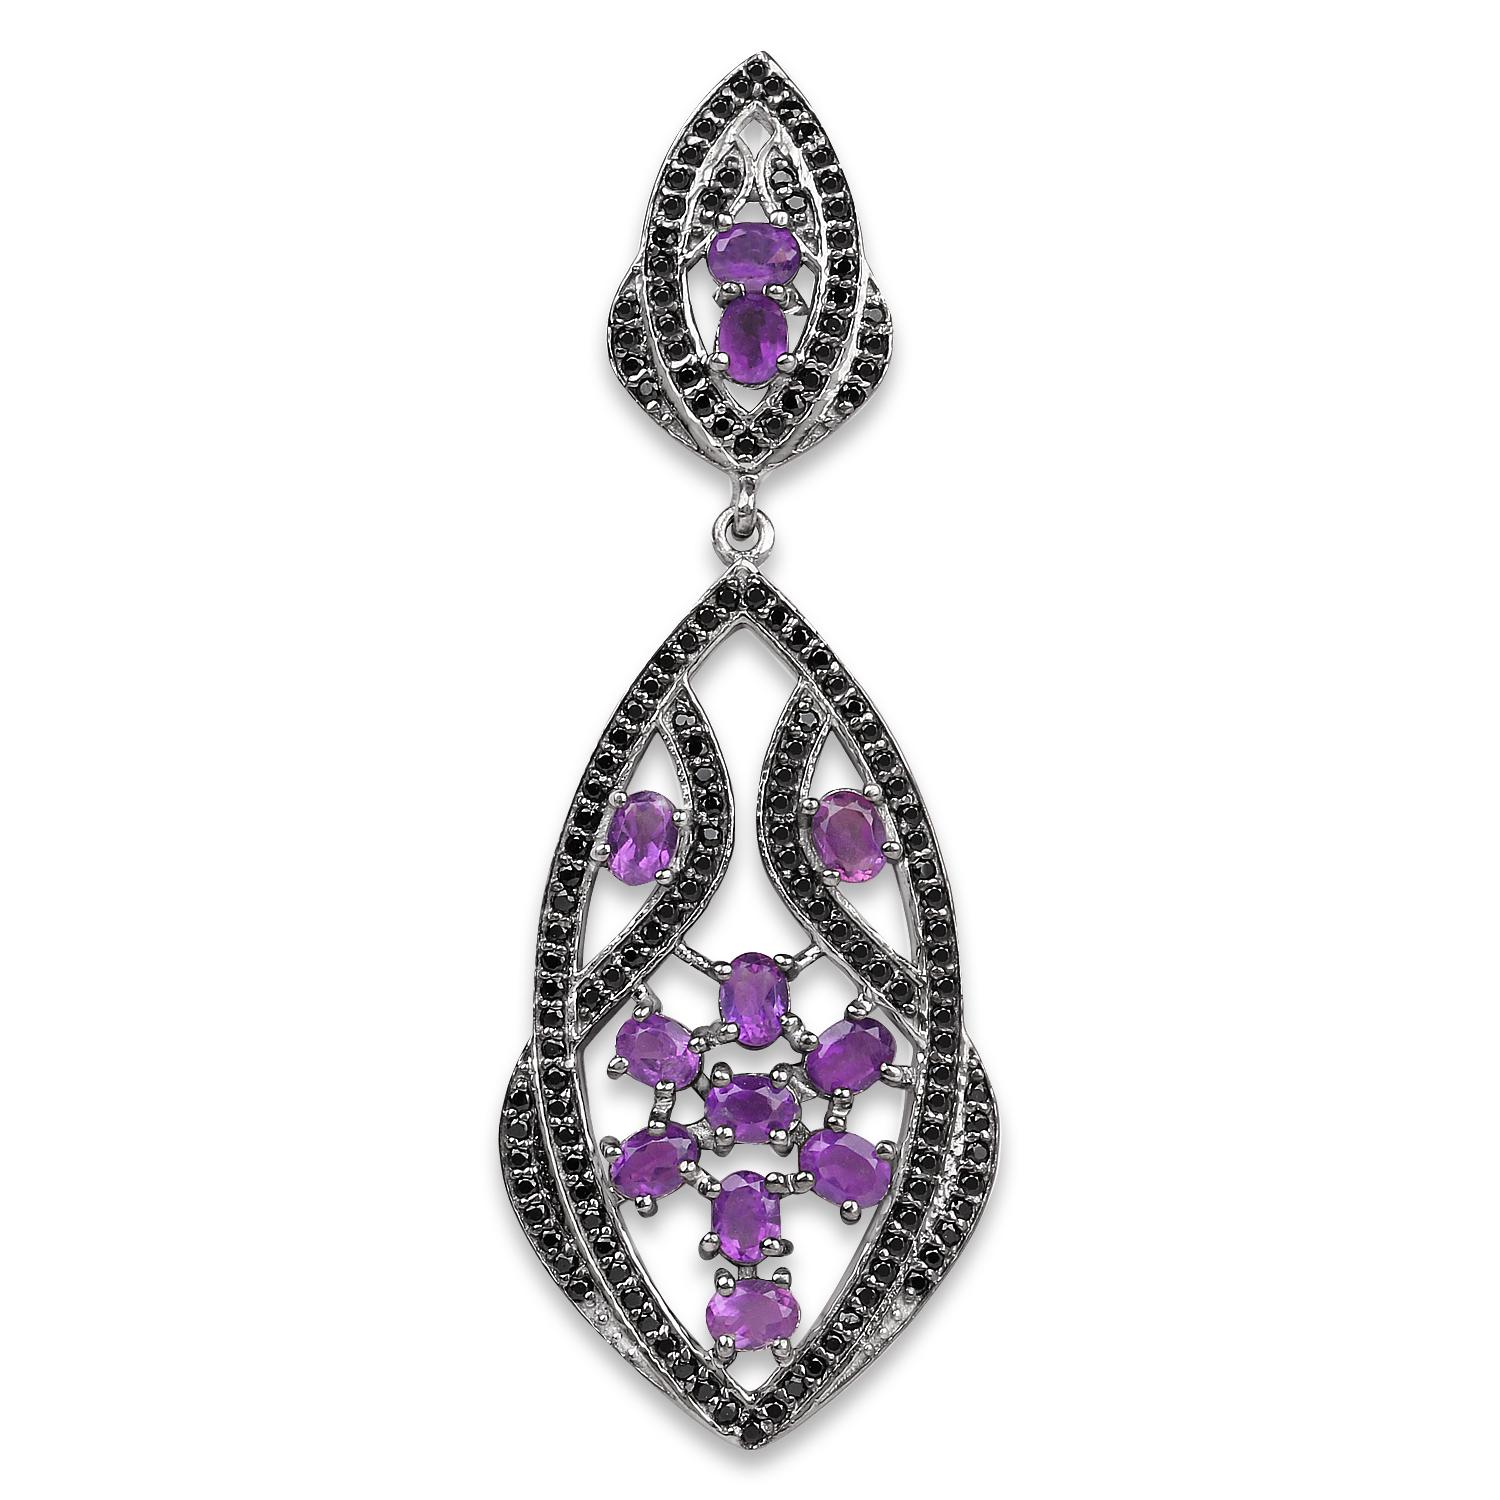 Oval Cut Amethyst Earrings With Black Spinels 5.74 Carats Rhodium Plated Sterling Silver For Sale